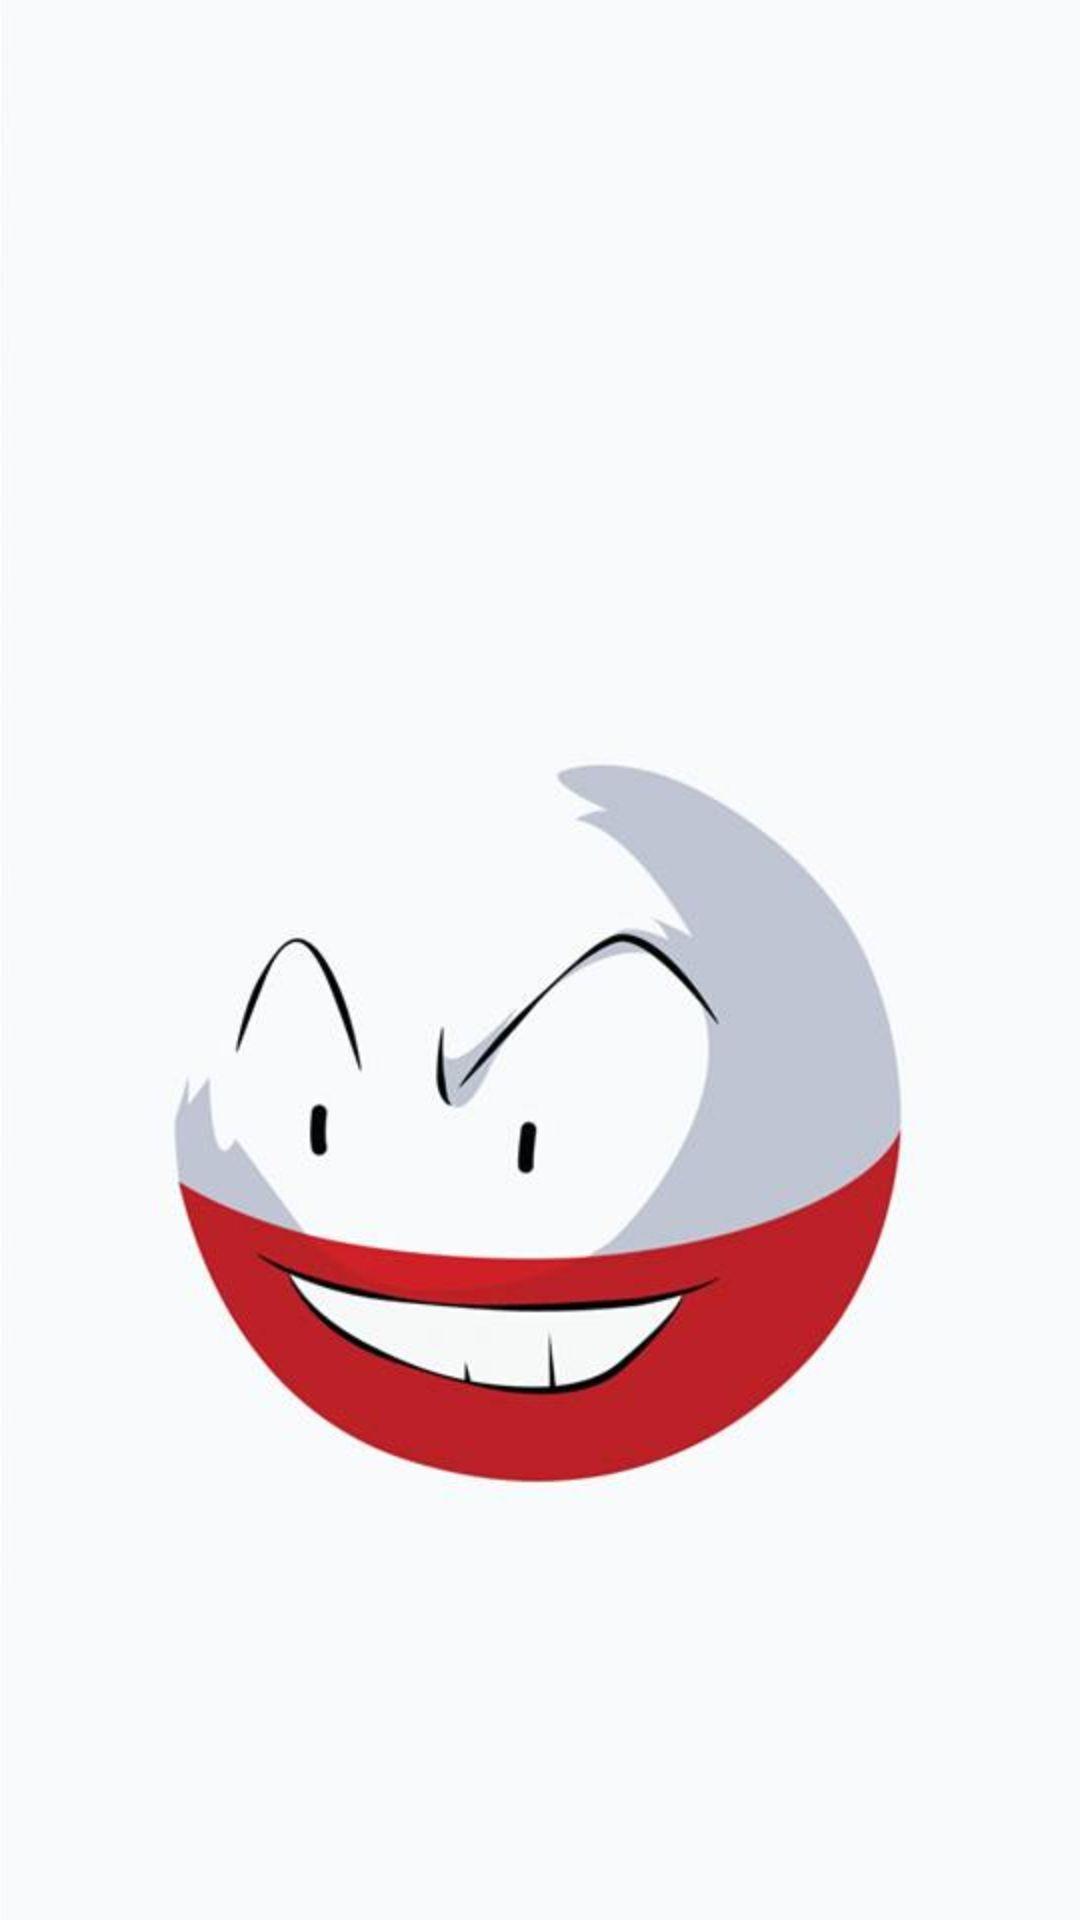 Electrode to see more Pokemon Go iPhone wallpaper!